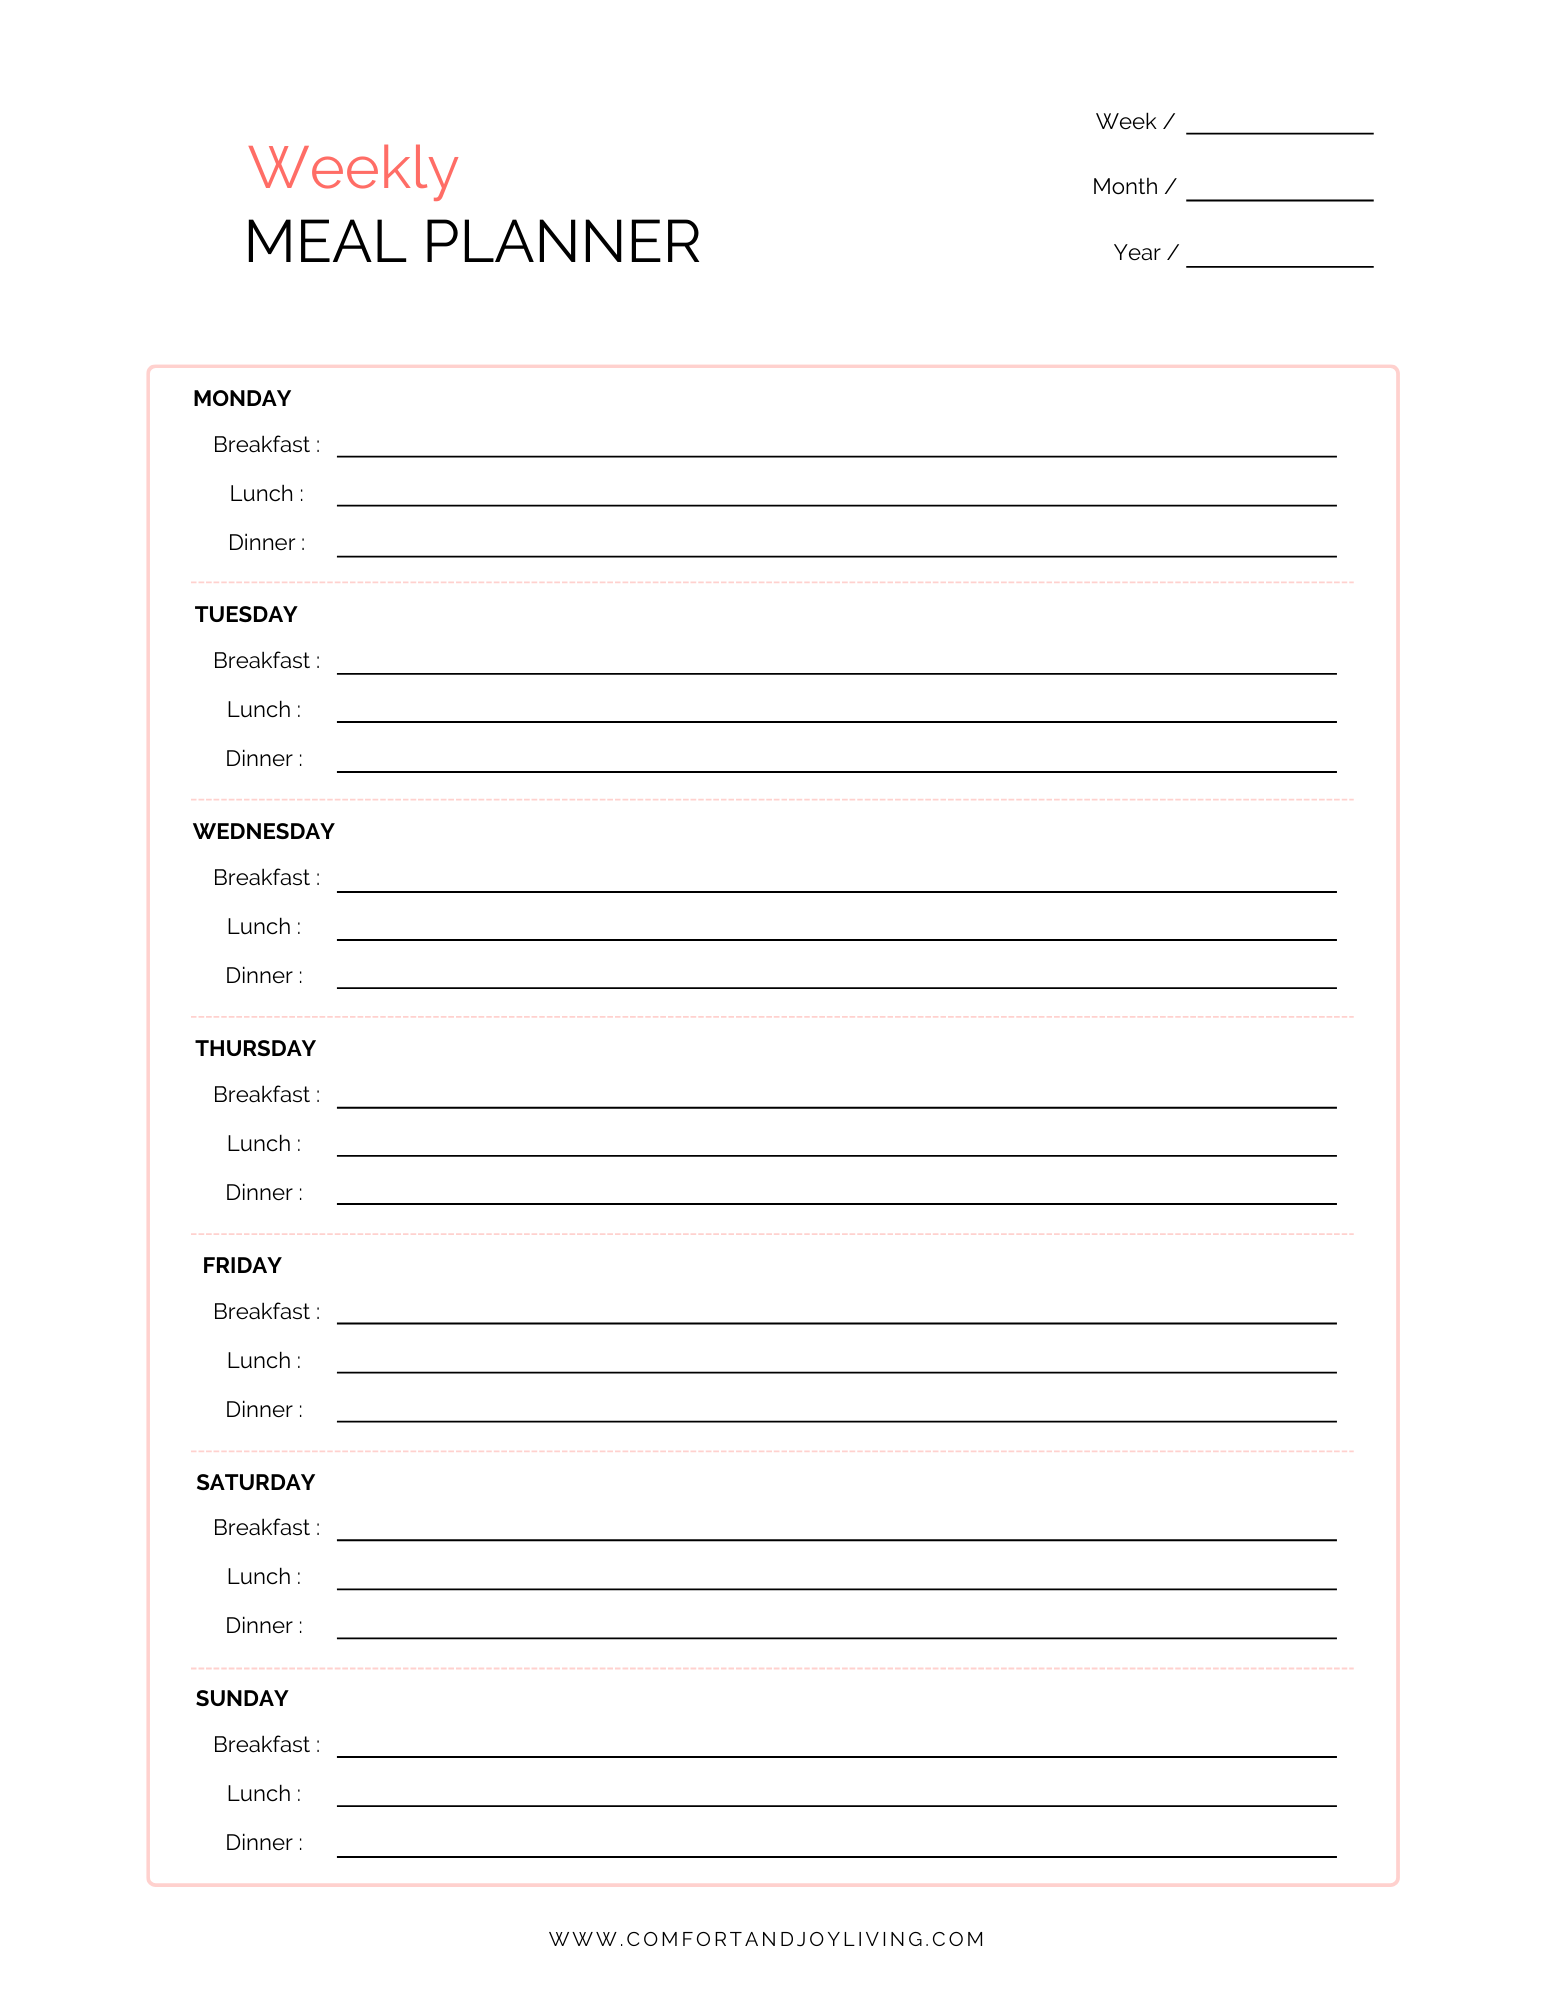 Meal-Planning-2.png